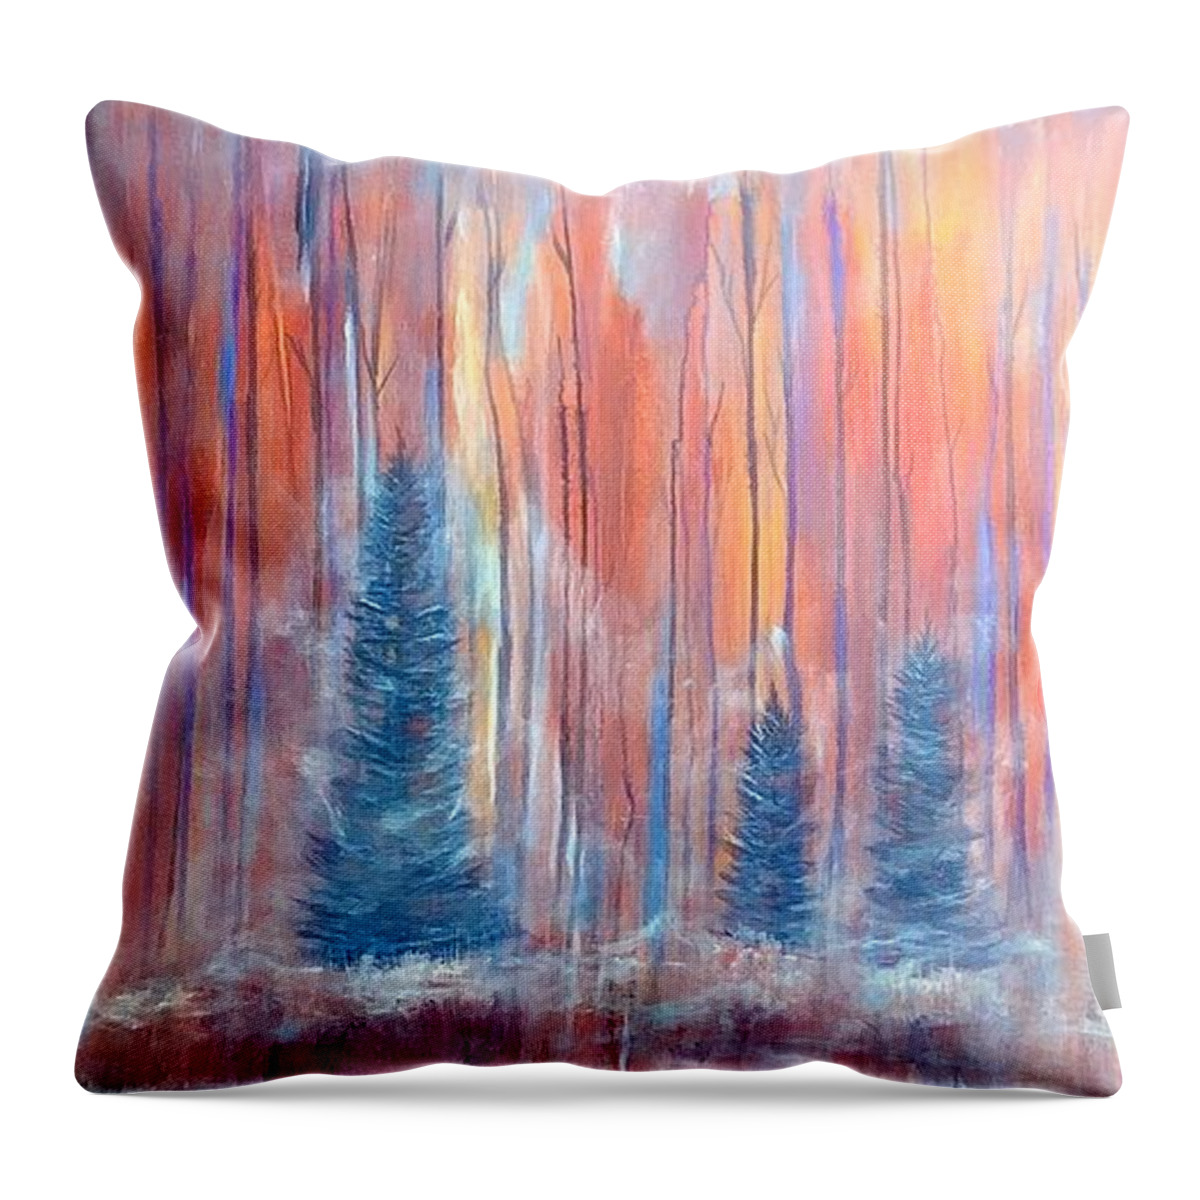 Acrylic Painting Throw Pillow featuring the painting Spirits at Dusk by Soraya Silvestri